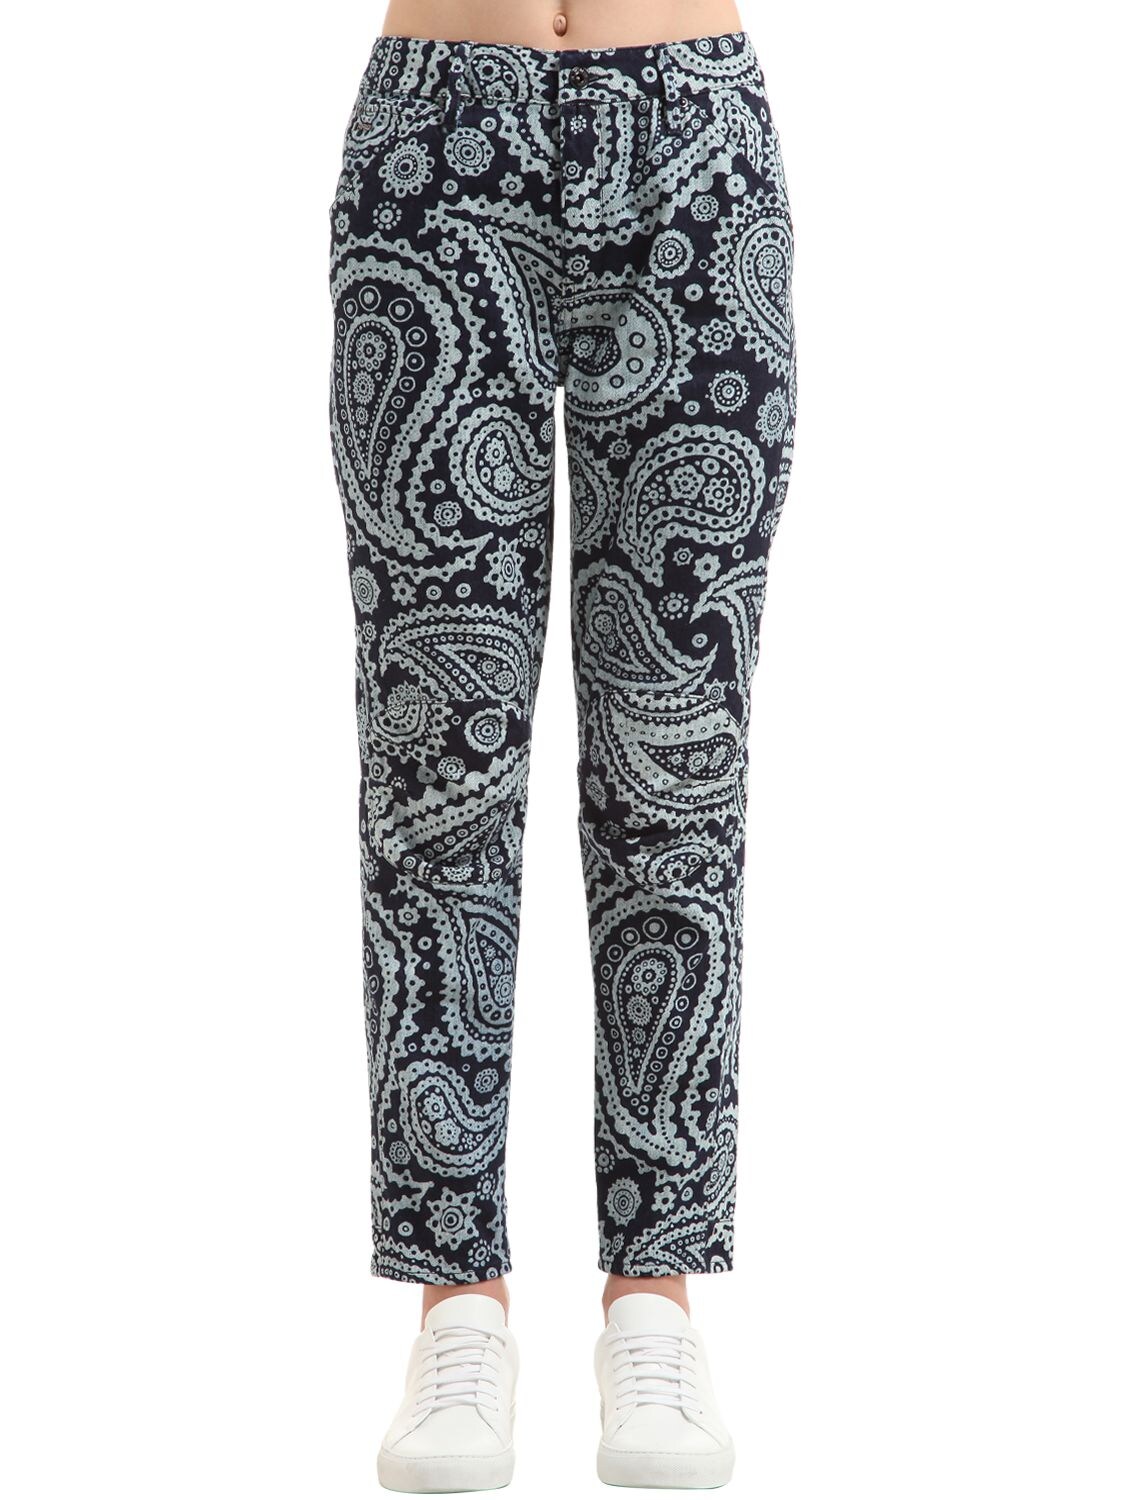 G-star By Pharrell Williams Elwood Indian Paisley Print Denim Jeans In Multicolor